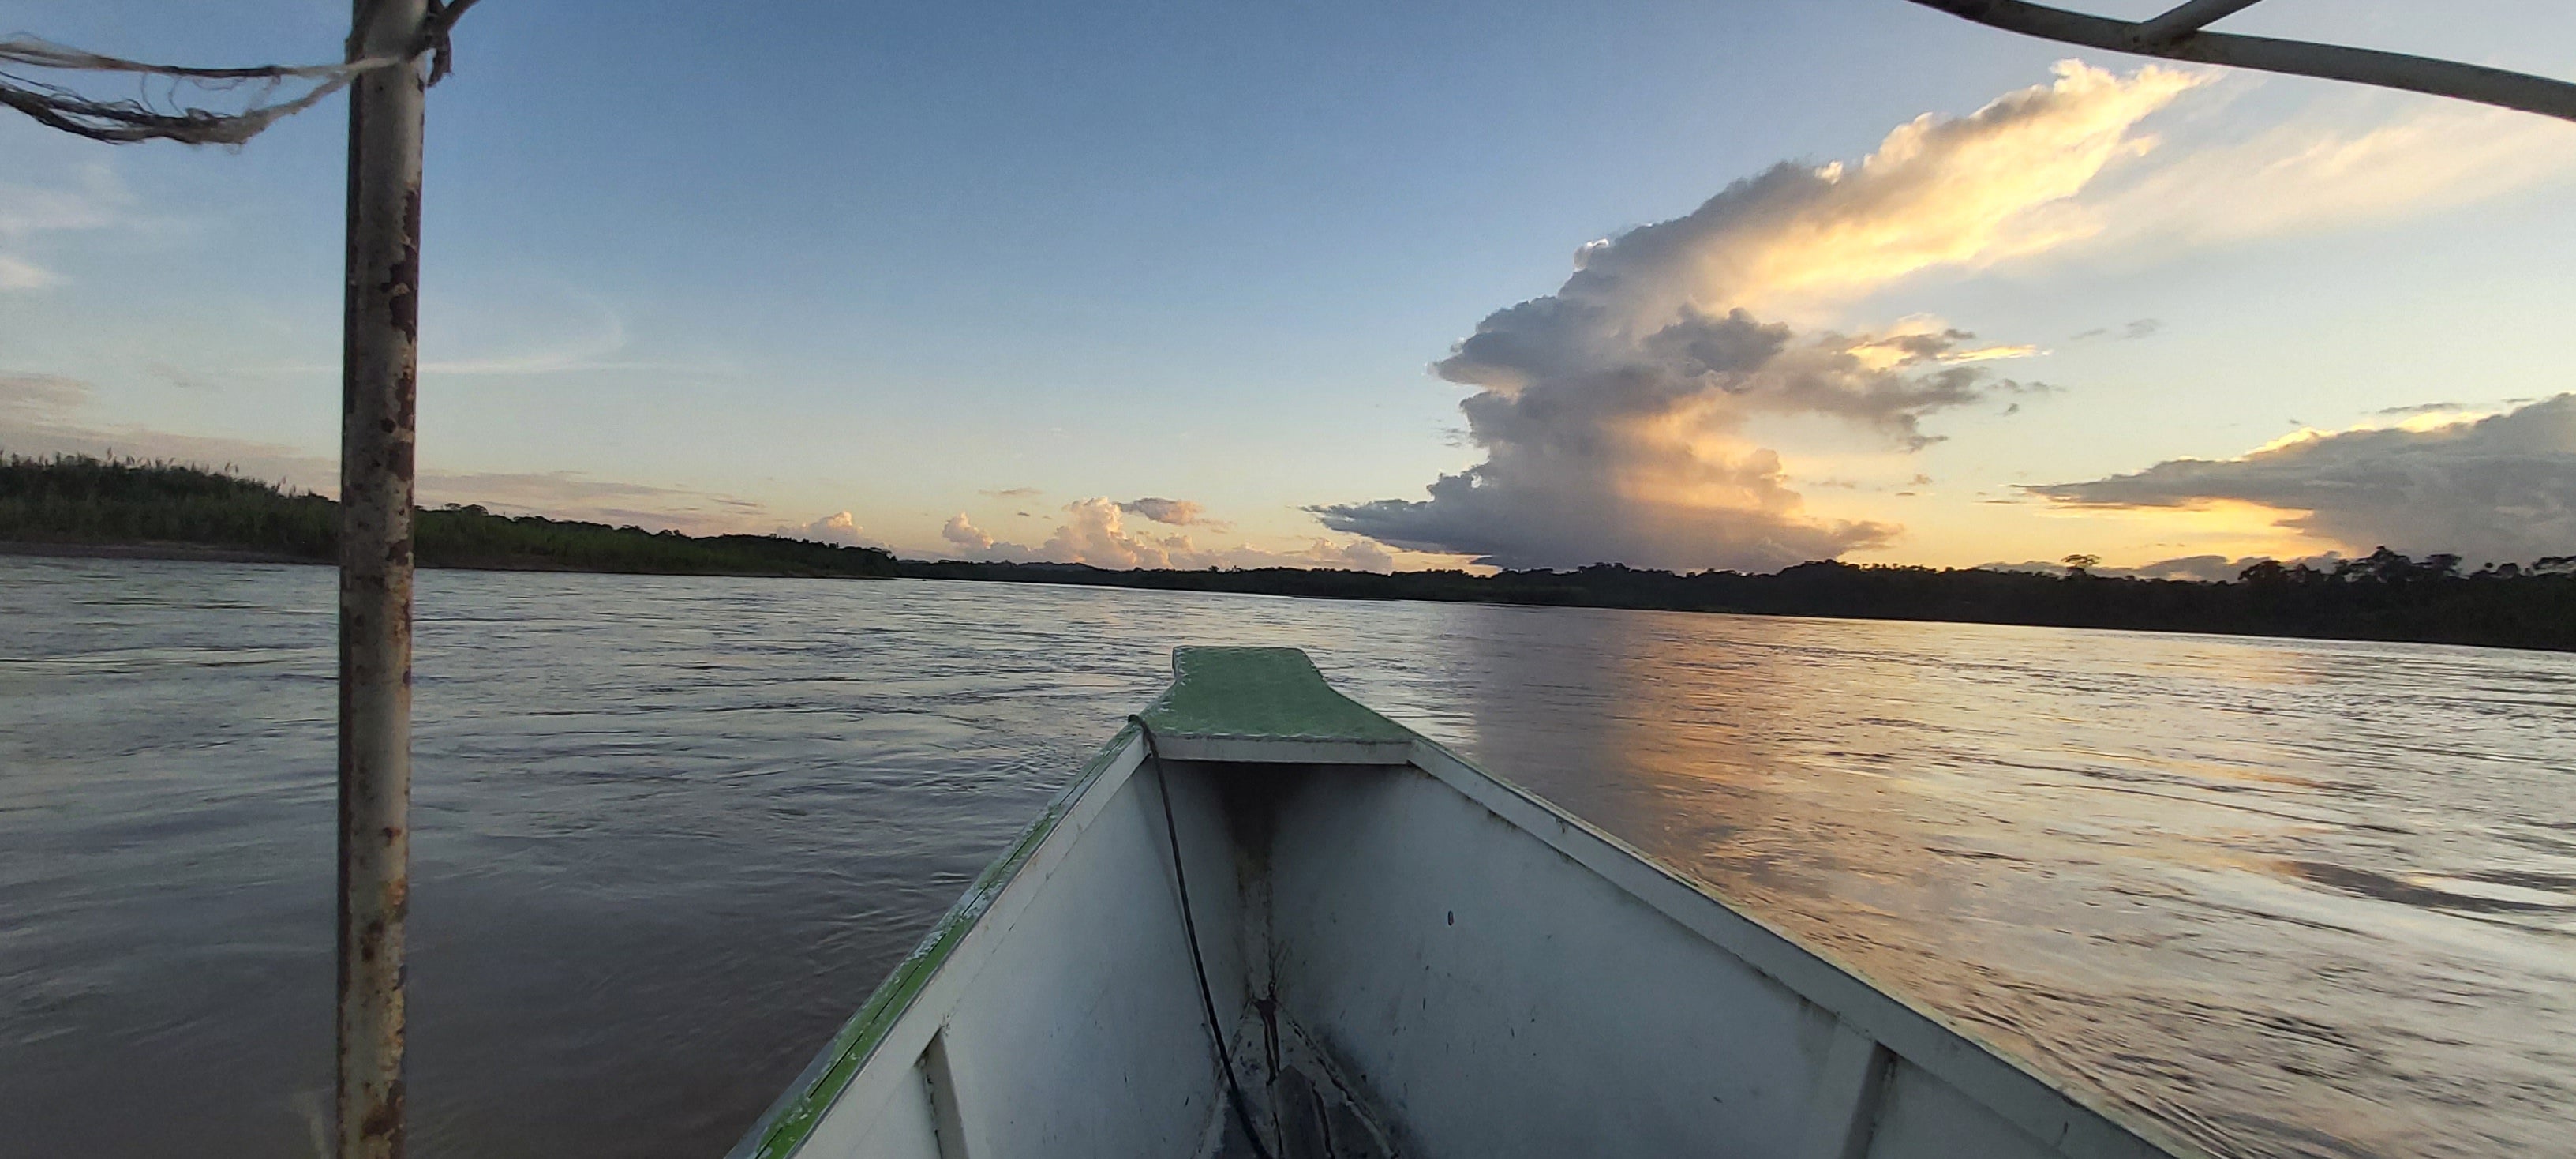 The Maranon River, a tributary of the Amazon